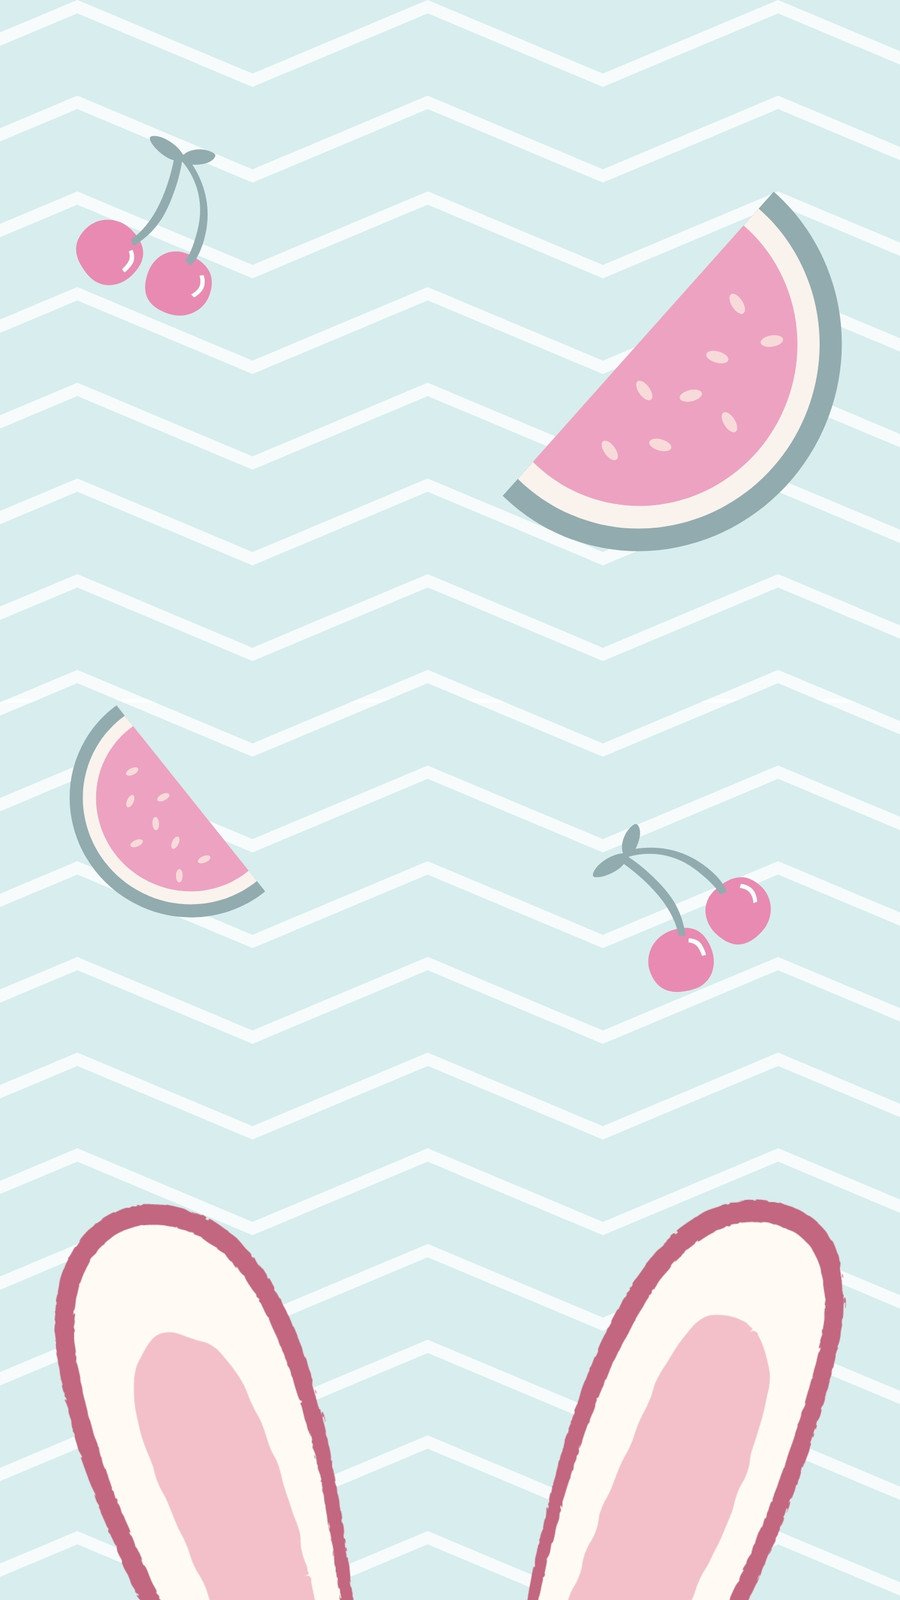 50 Cute and Pretty Pink Wallpapers For Free Download - Sweet Money Bee